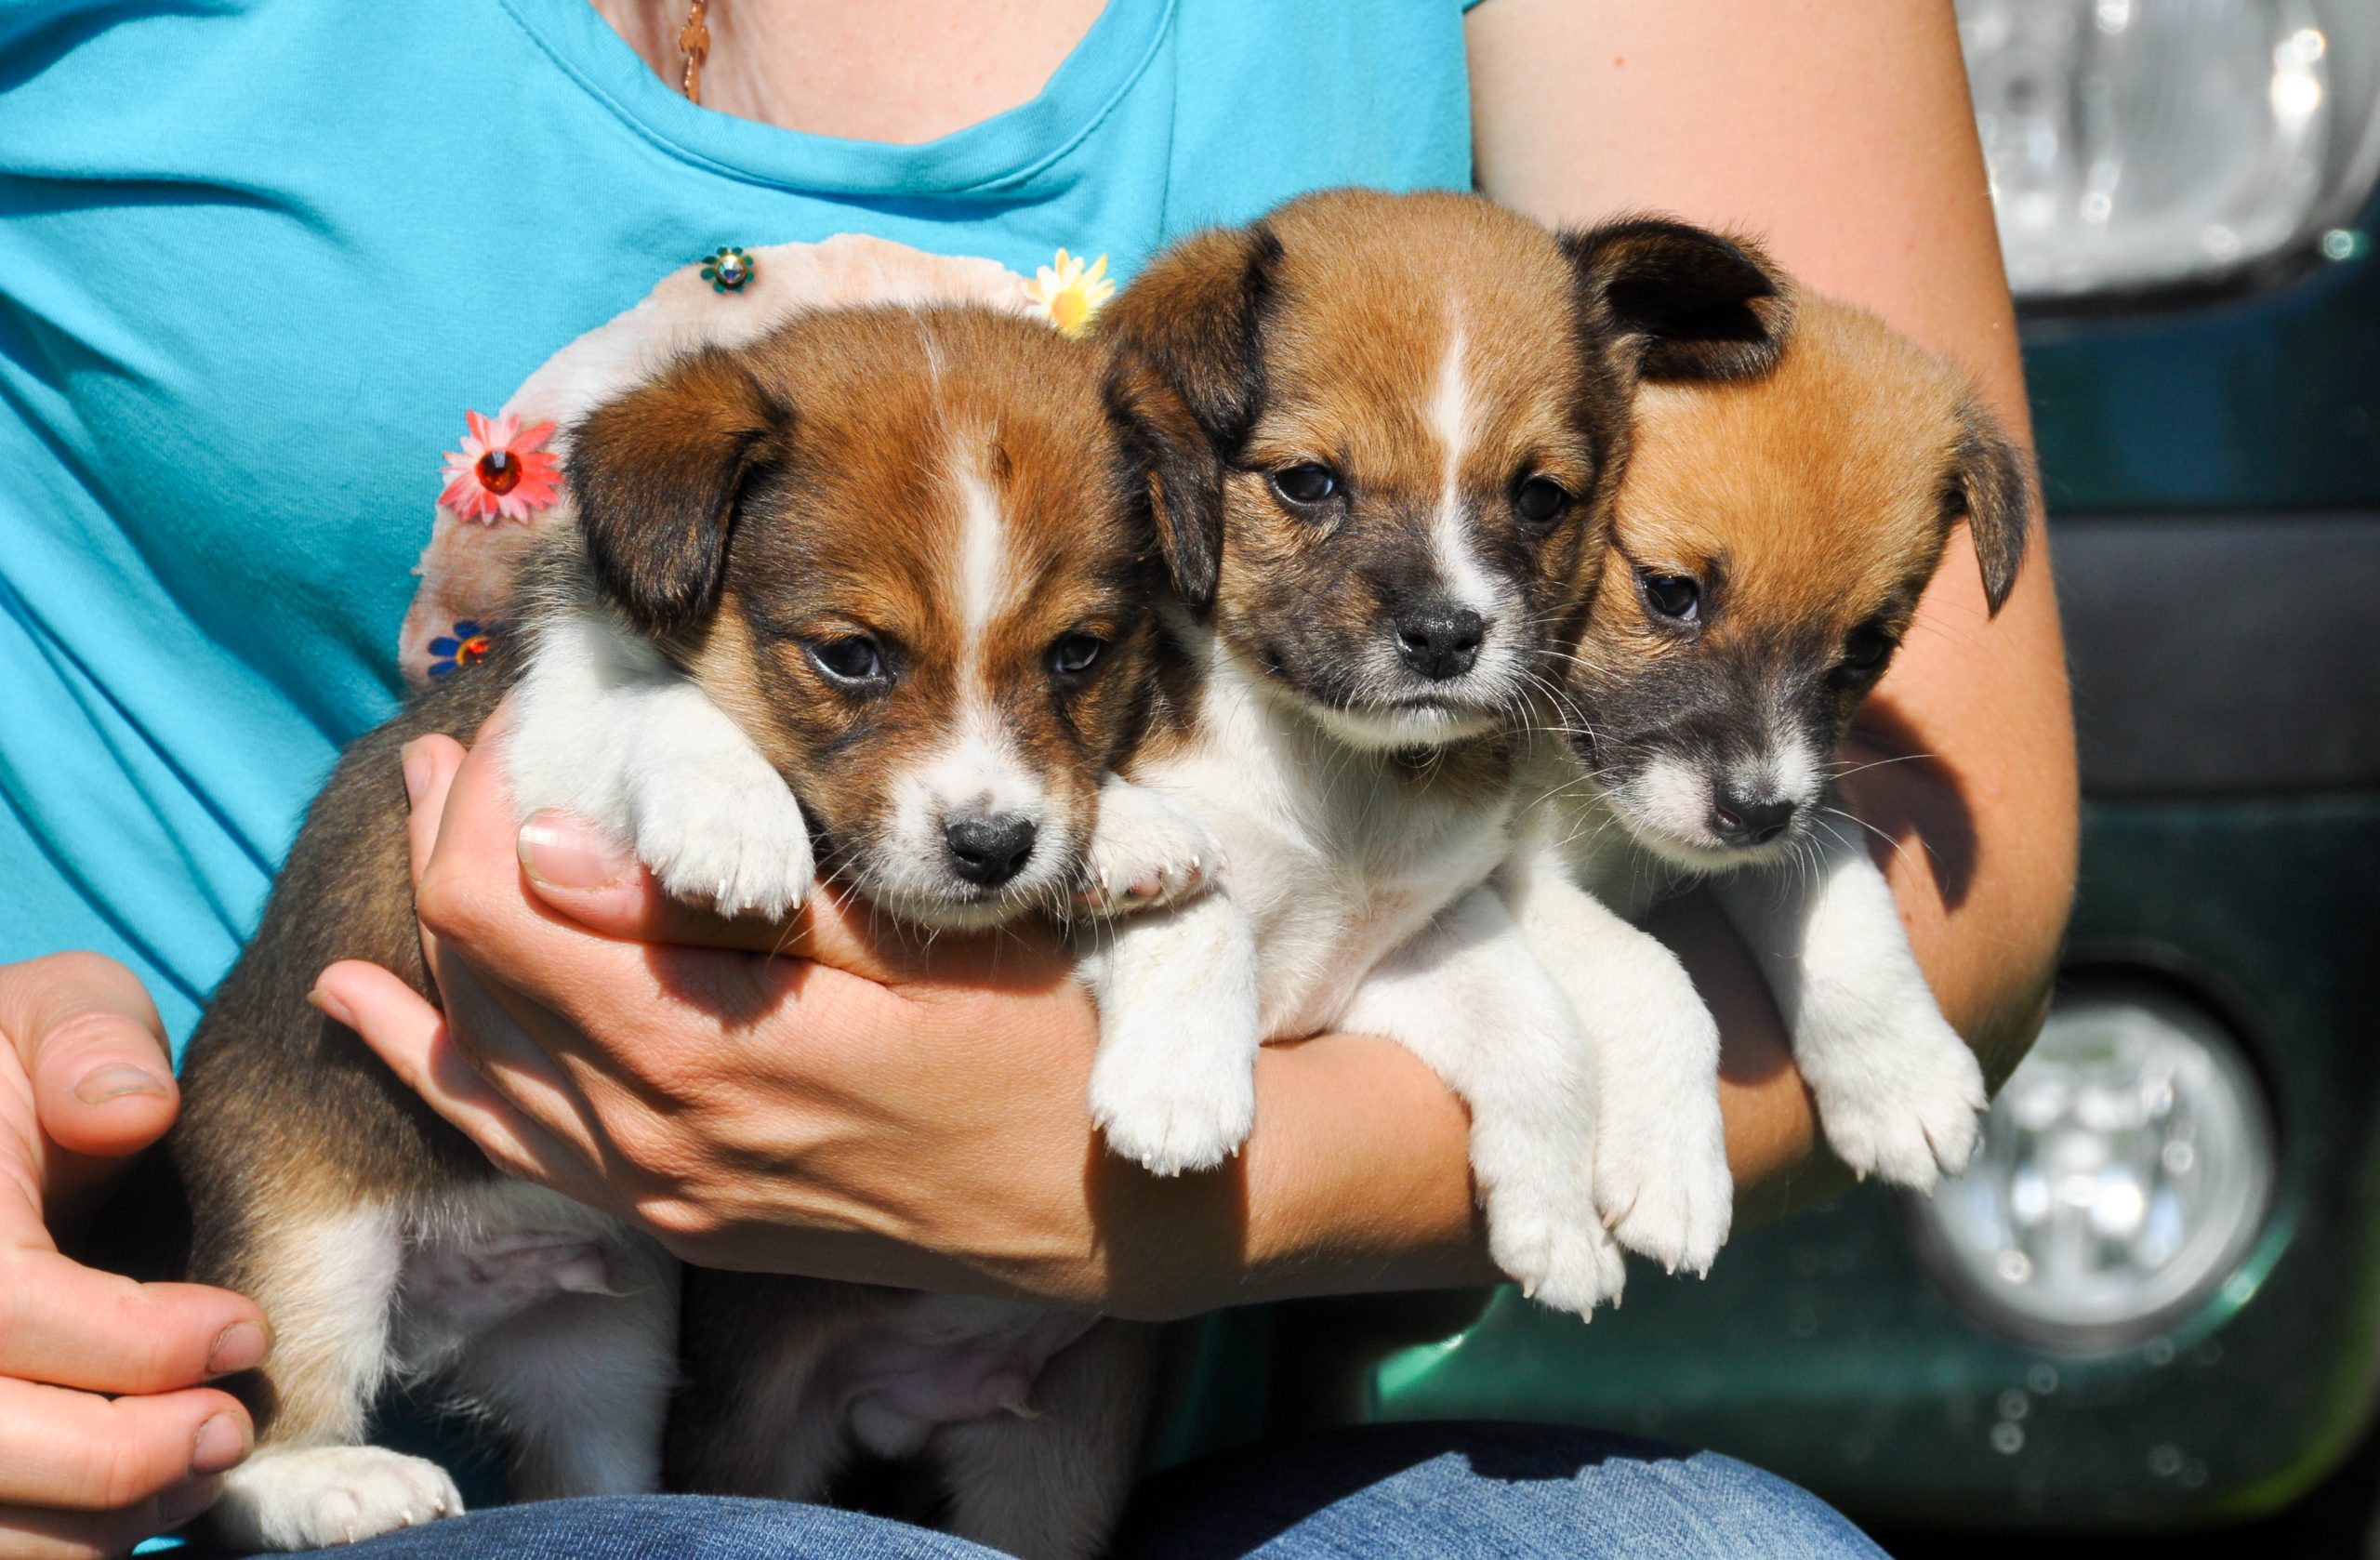 Concerns mount over rise in illegal puppy sales